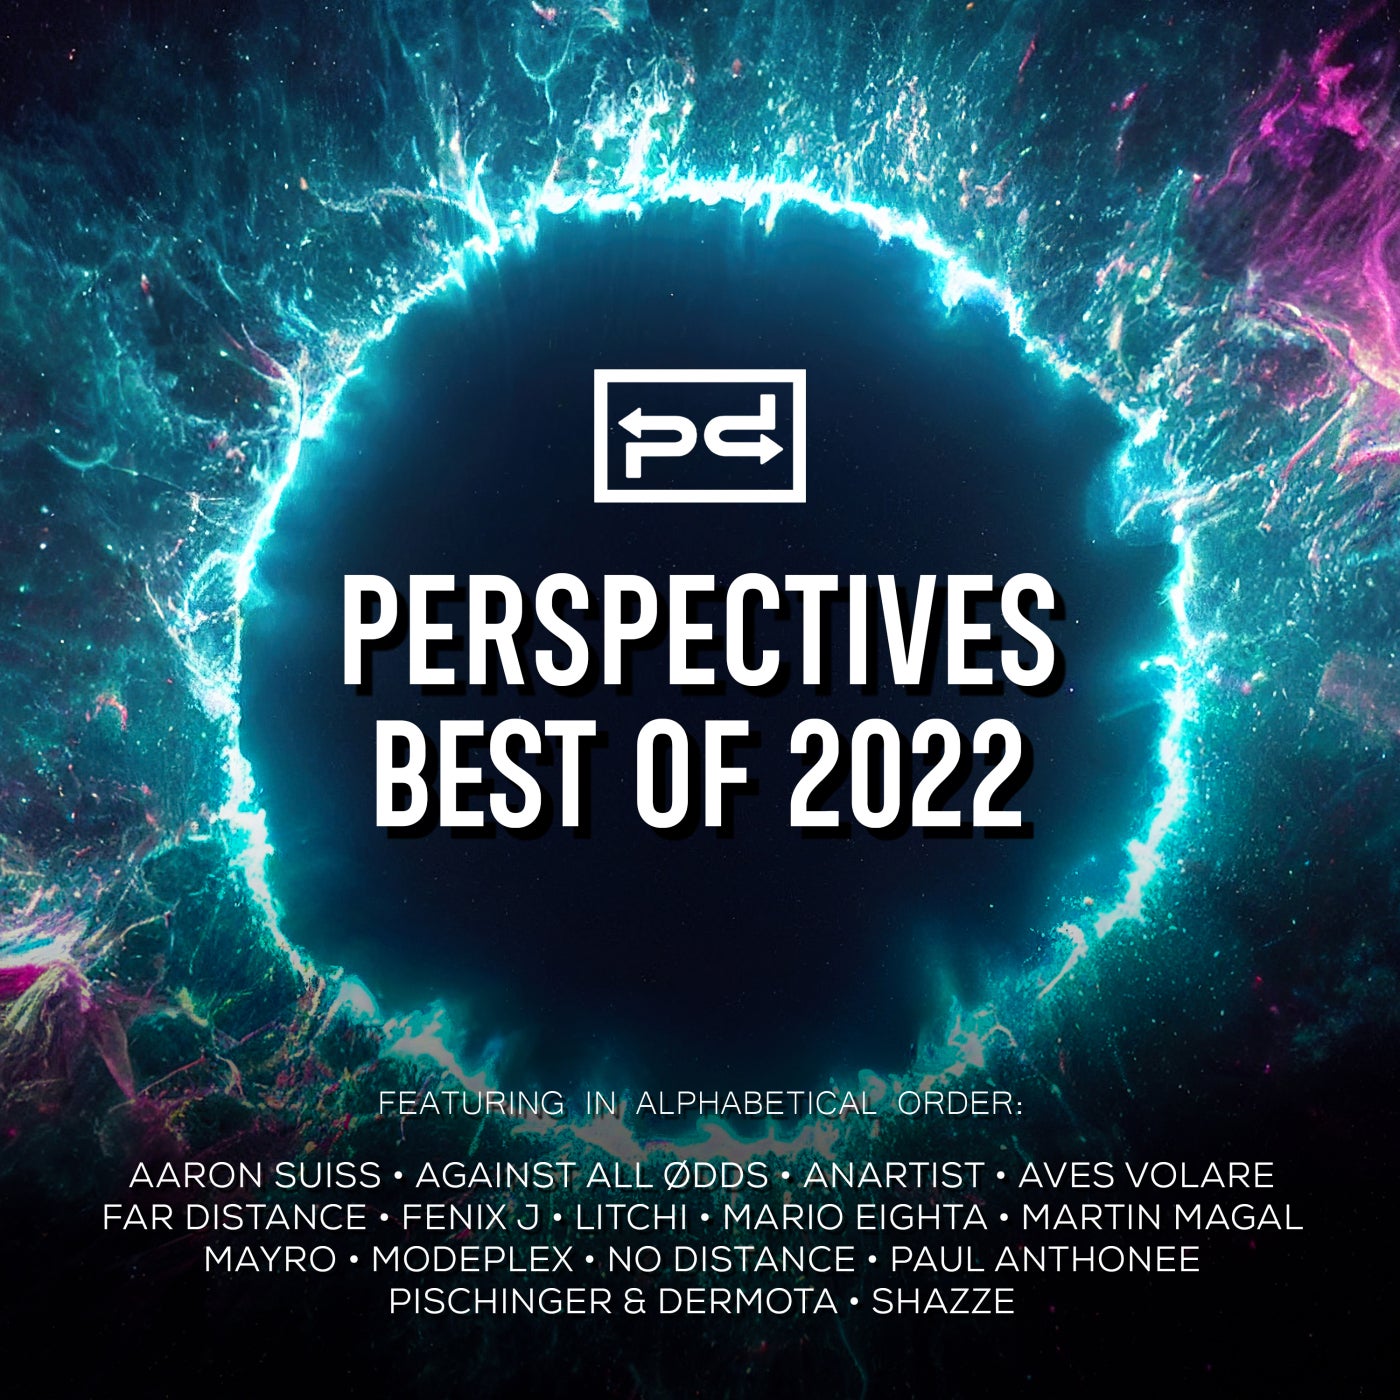 Perspectives Best of 2022